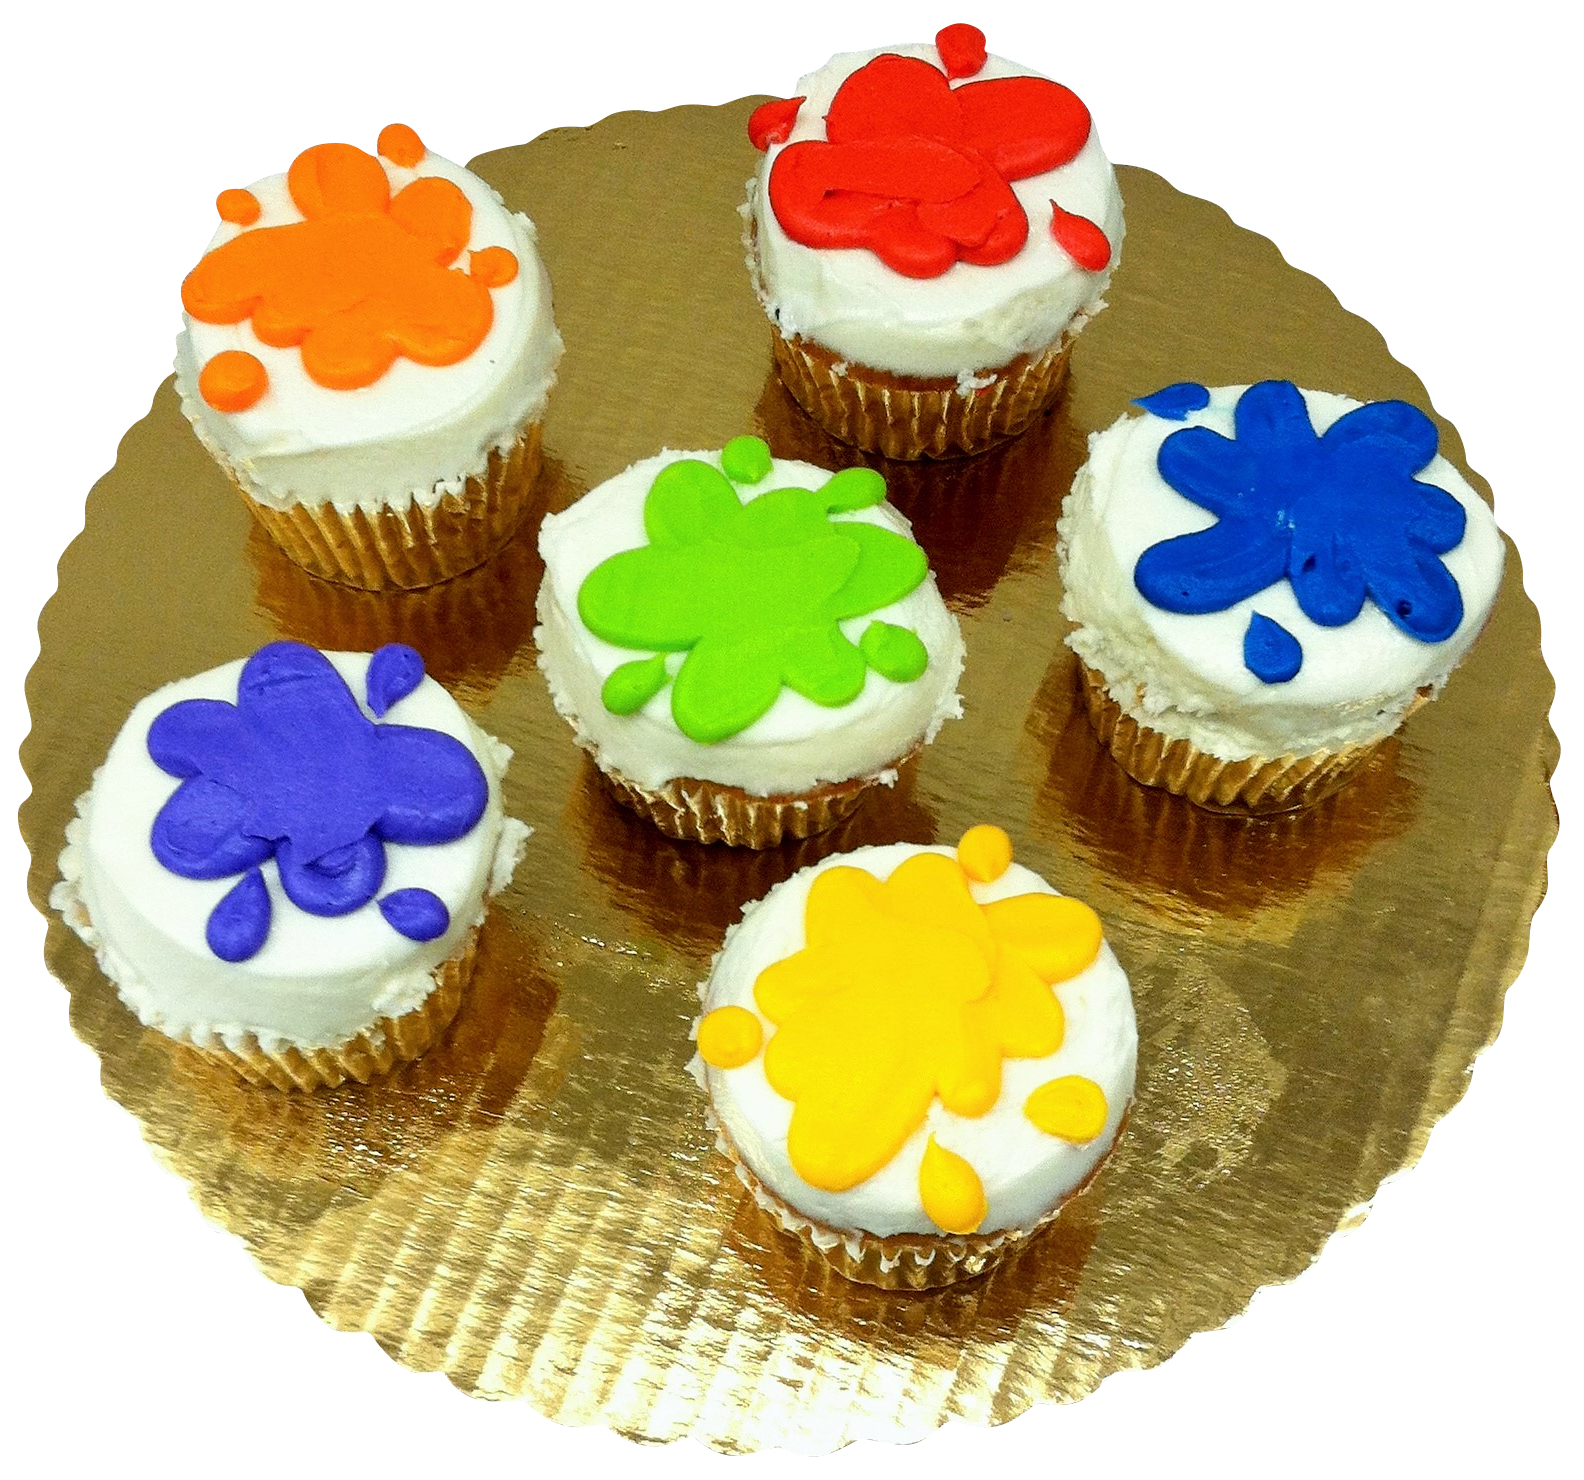 Paint Theme Cupcakes - Pack of 6